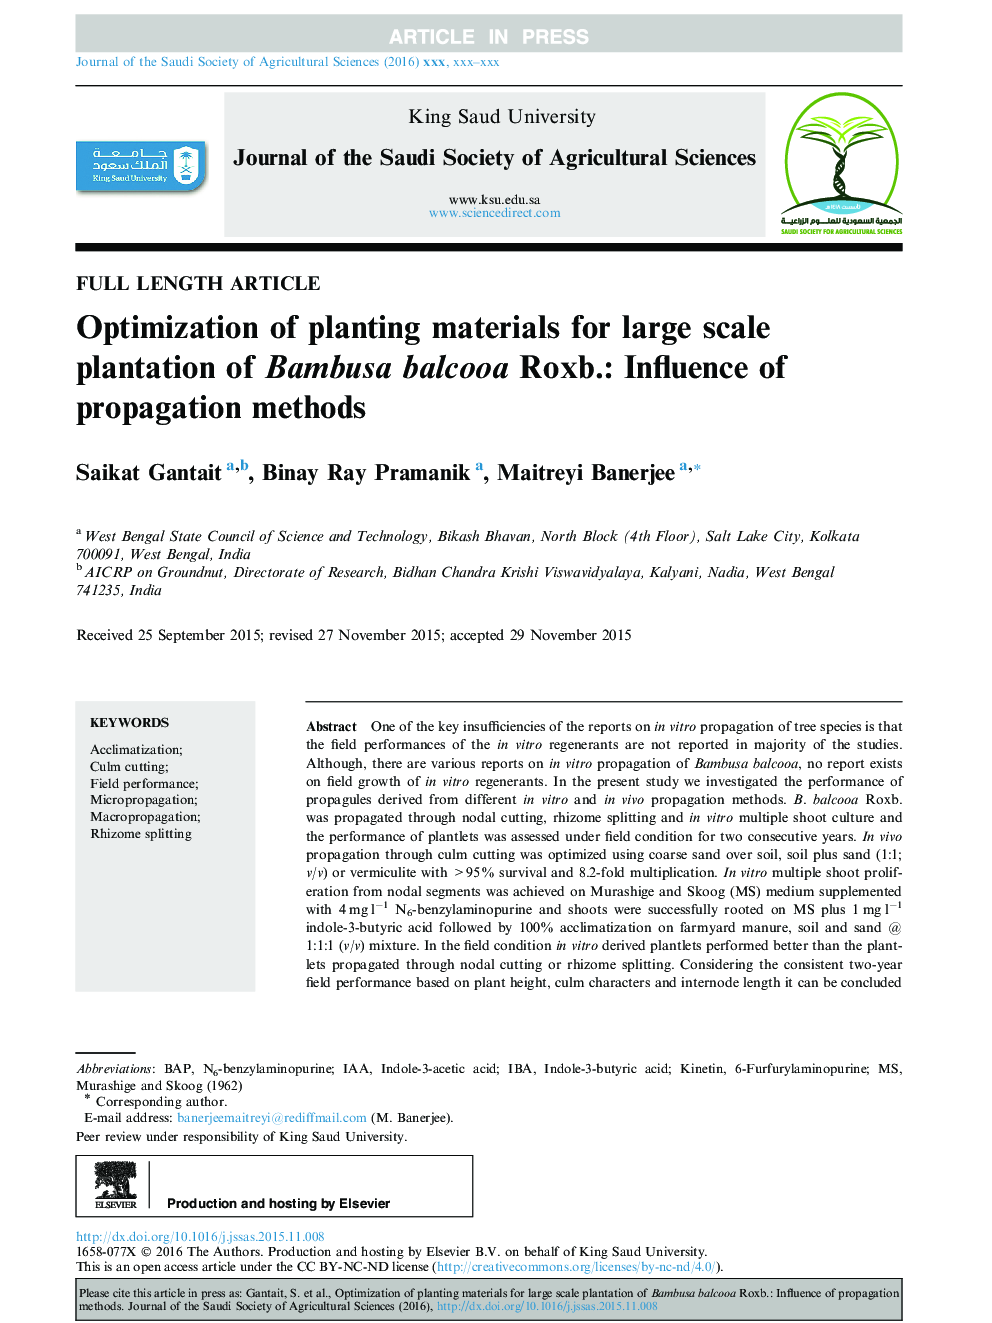 Optimization of planting materials for large scale plantation of Bambusa balcooa Roxb.: Influence of propagation methods